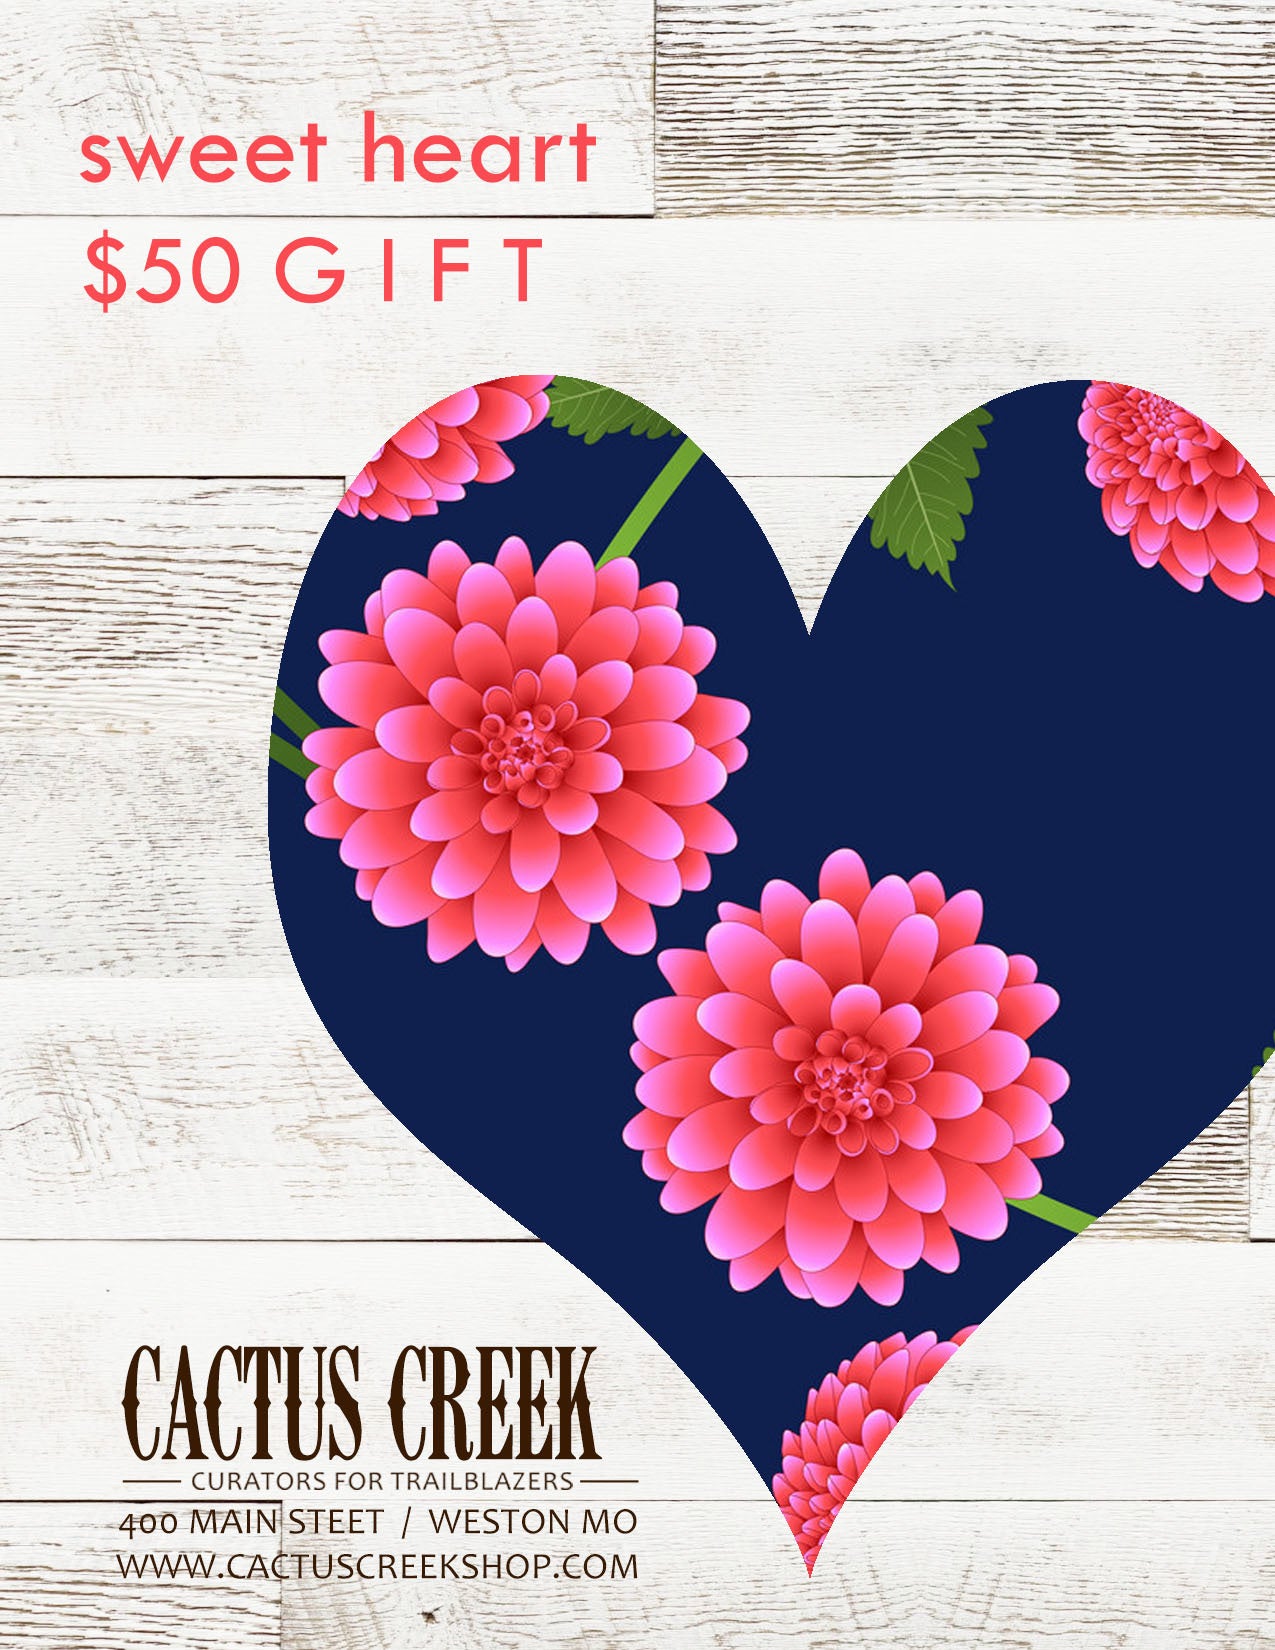 Sweet Heart Gift Card for $50 for Cactus Creek in Weston Missouri - Navy Heart with Pink Flowers on White Barn Wood